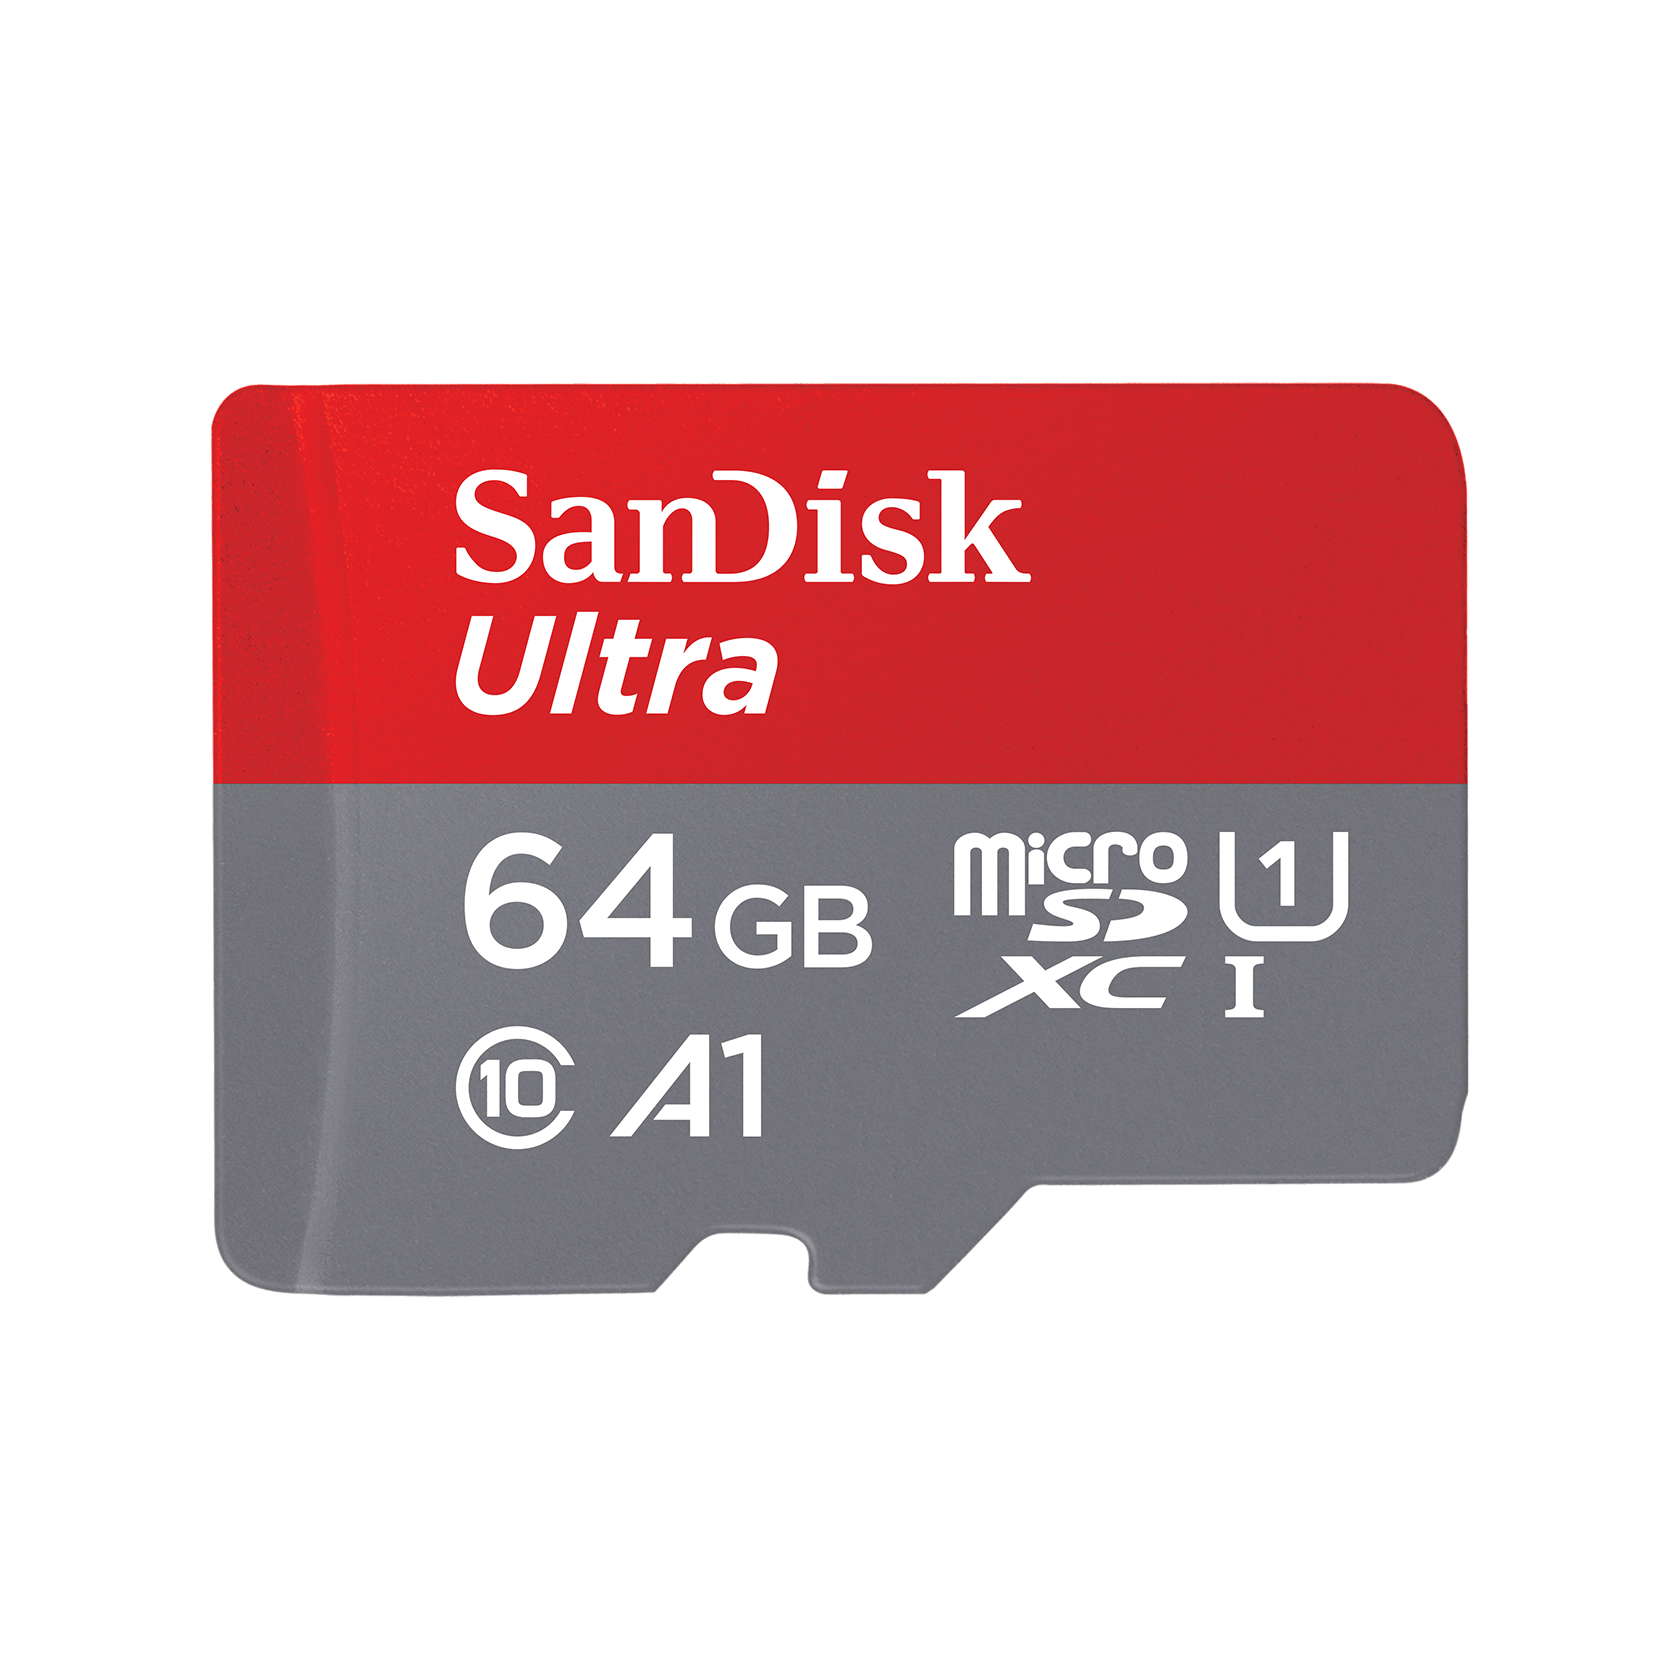 SanDisk Ultra® MicroSDXC™ UHS-I Card with Adapter - 64GB - SDSQUA4-064G-AN6MA